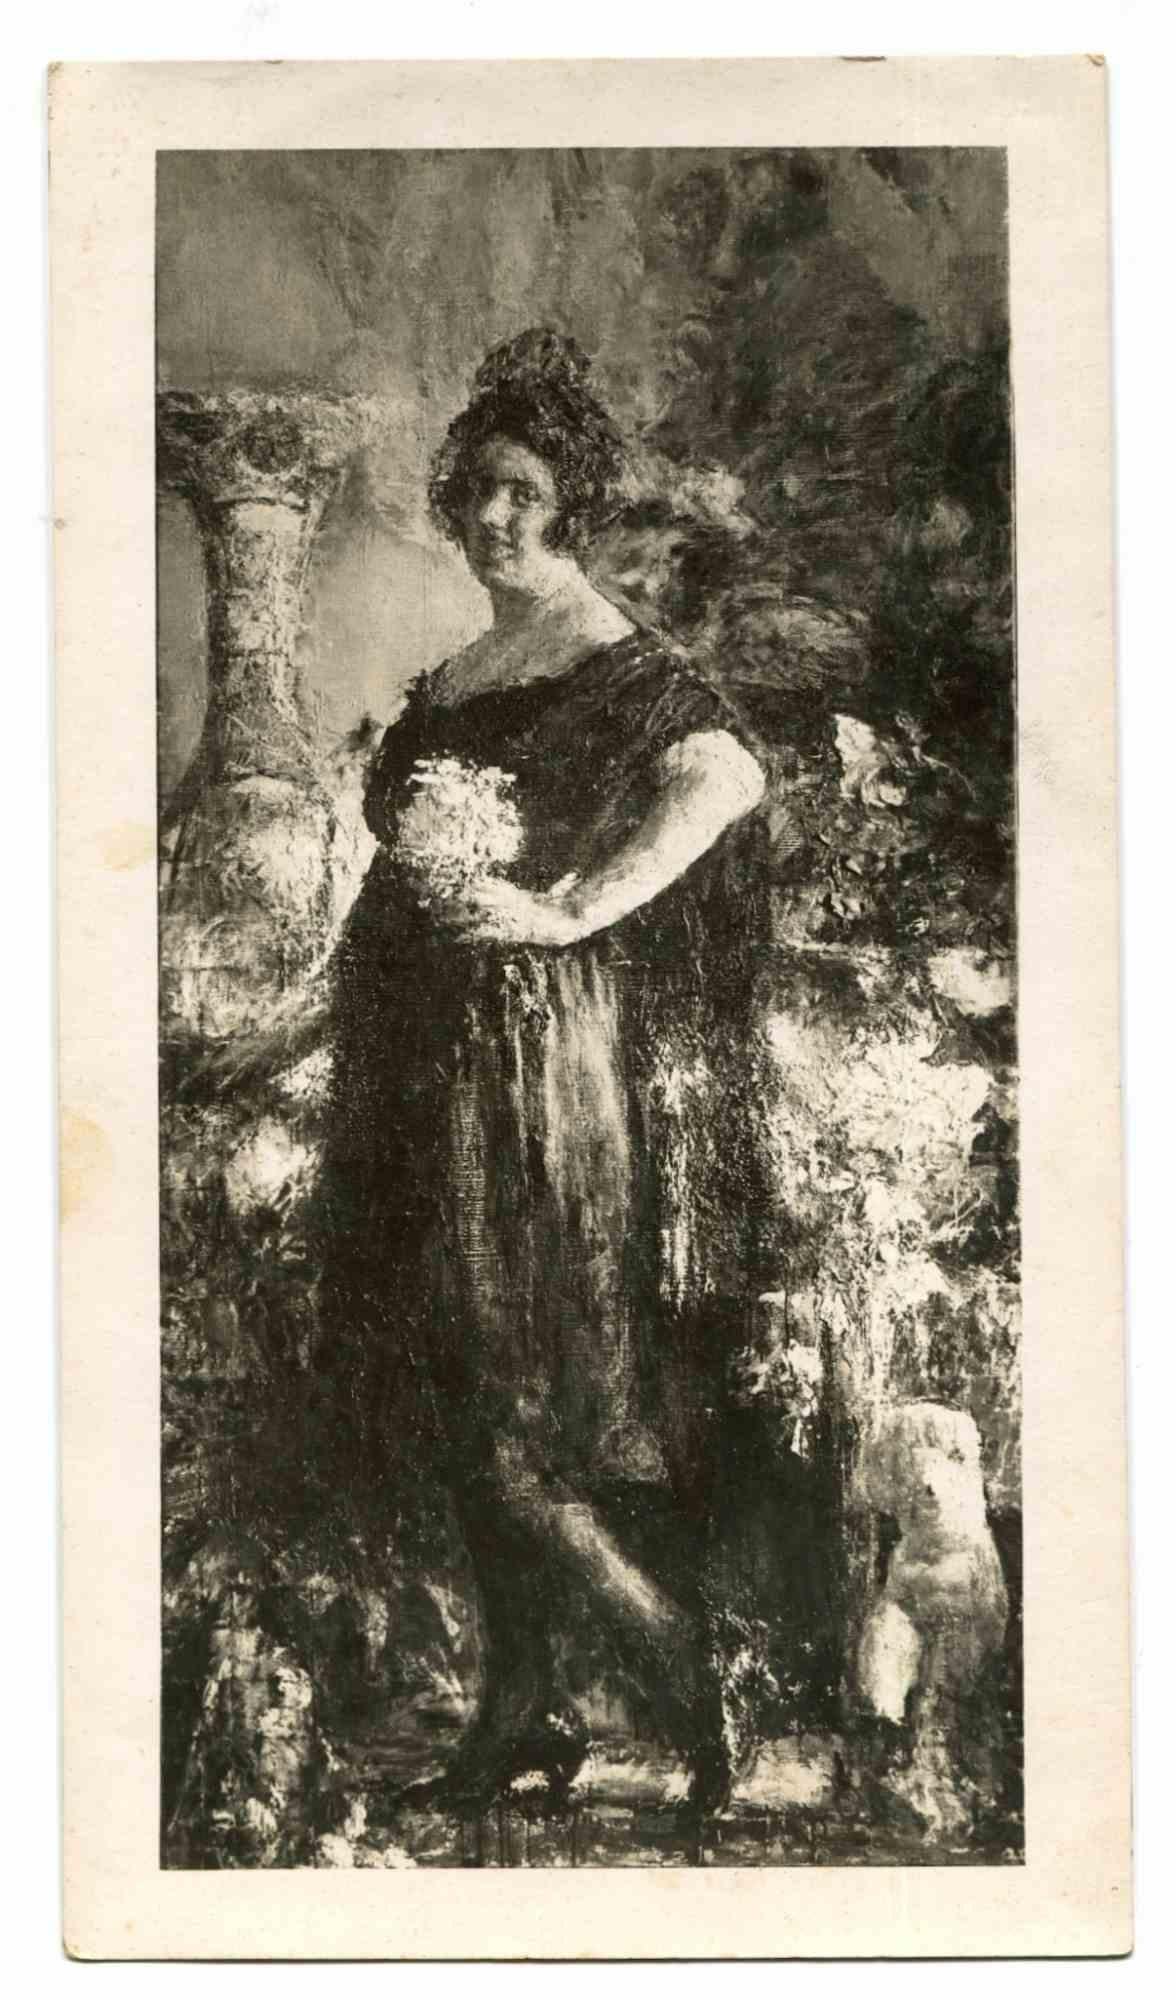 Unknown Figurative Photograph - Vintage Photo of Painting - Early 20th Century